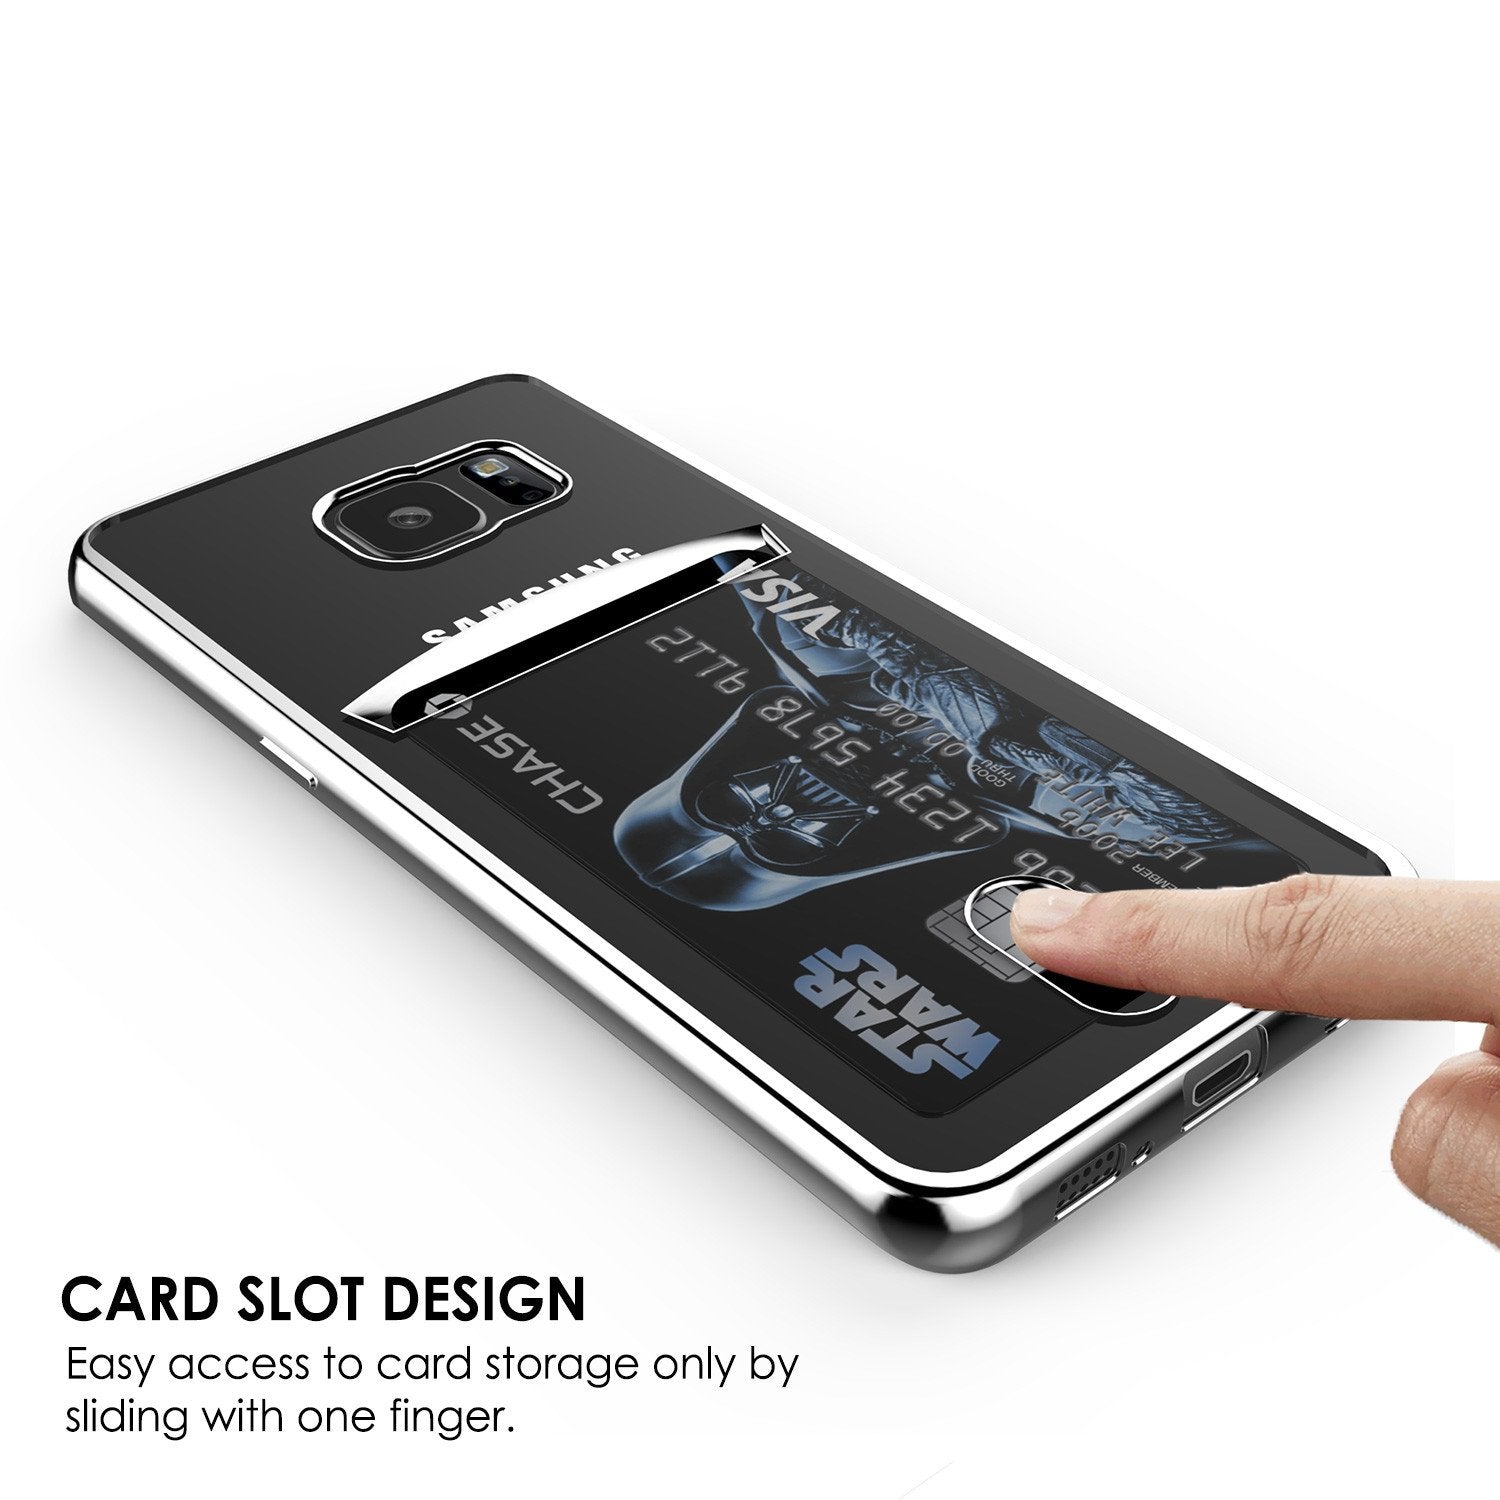 Galaxy S7 EDGE Case, PUNKCASE® LUCID Silver Series | Card Slot | SHIELD Screen Protector | Ultra fit